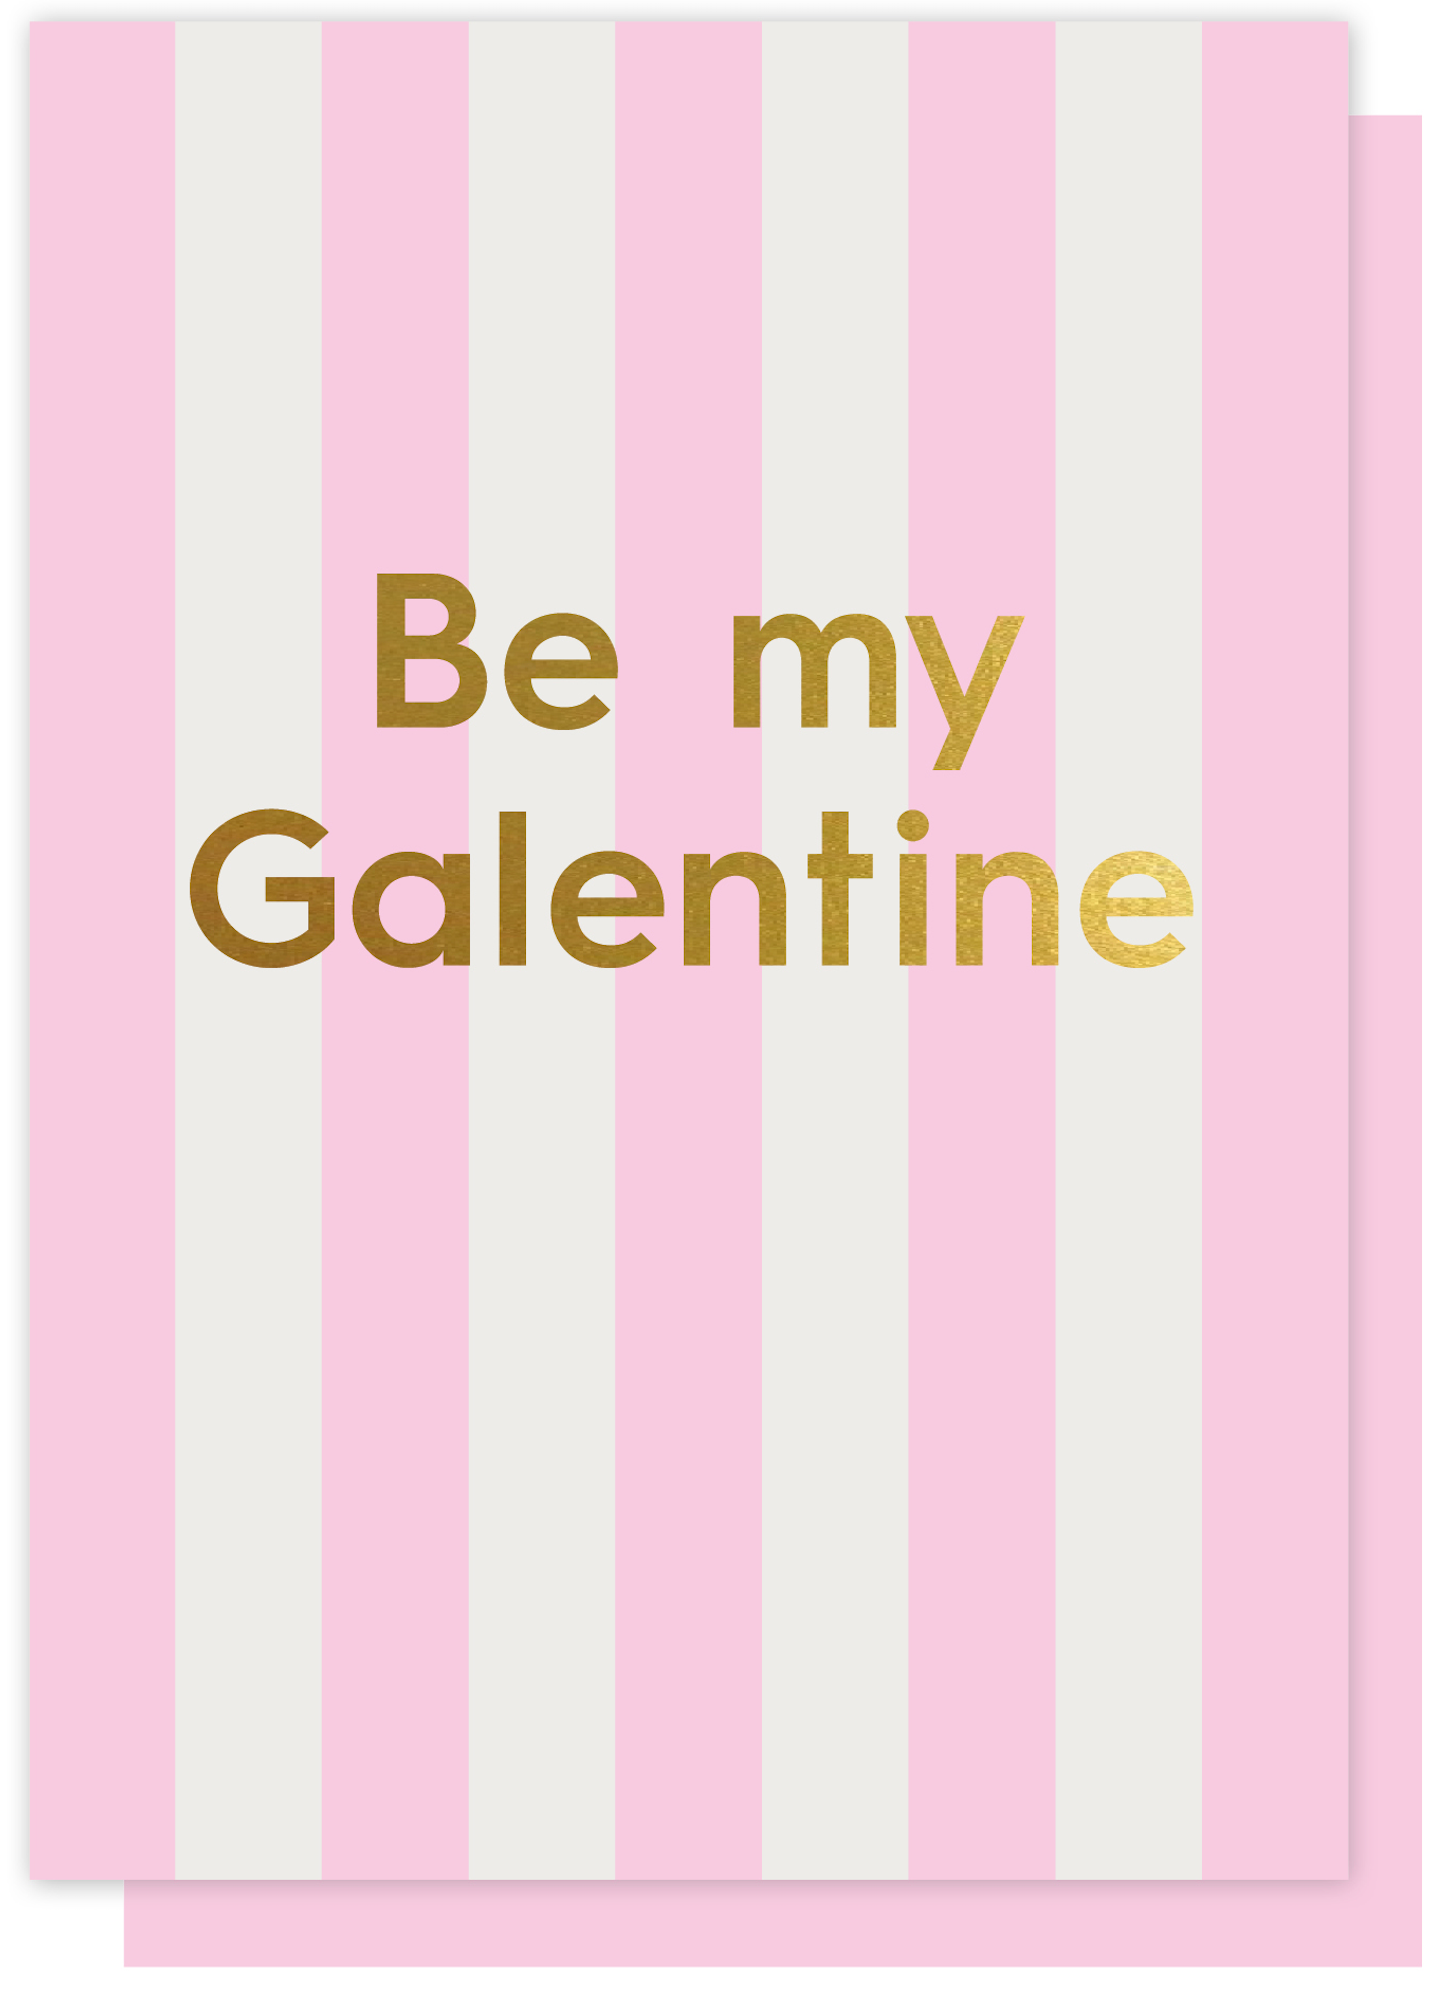 BE MY GALENTINE  CARD BY LUCKY INK